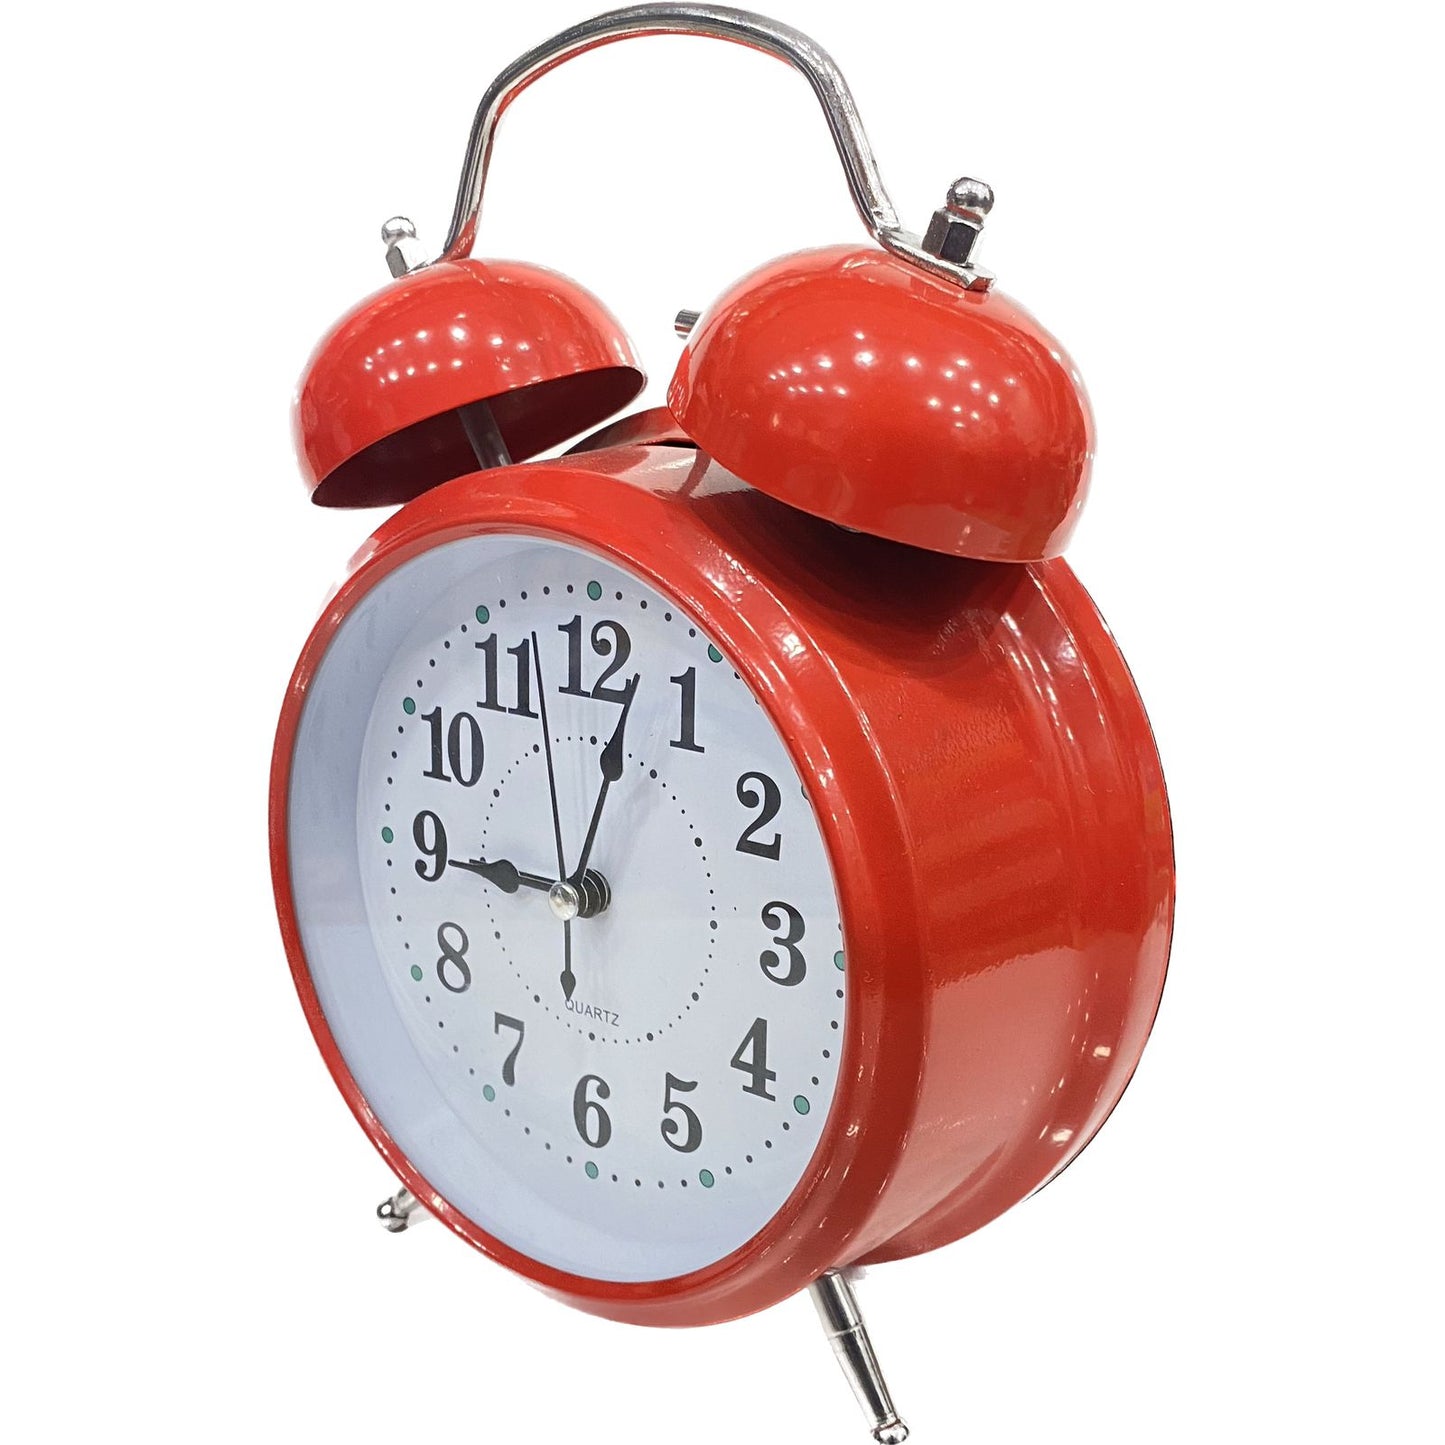 Matte 5 Inch Alarm Analogue Clock With Twin Bell